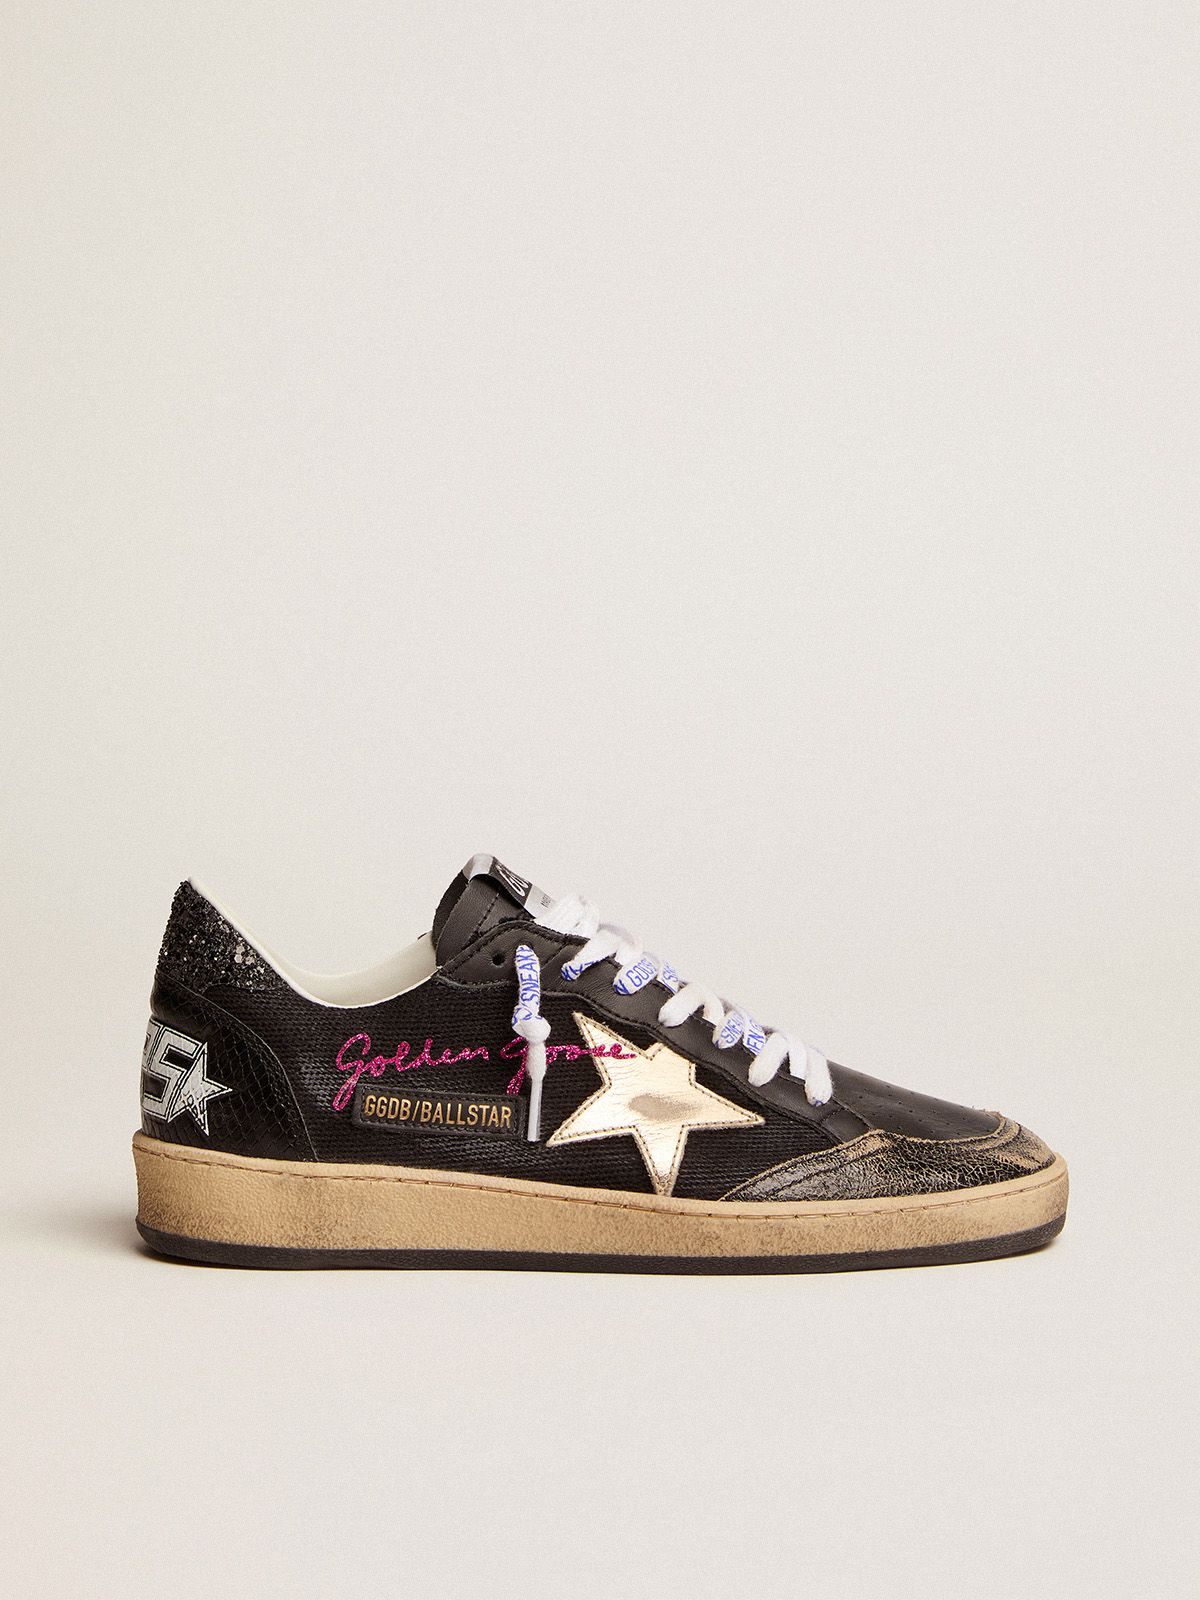 Ball Star sneakers in black canvas with platinum metallic leather star and black glitter heel tab